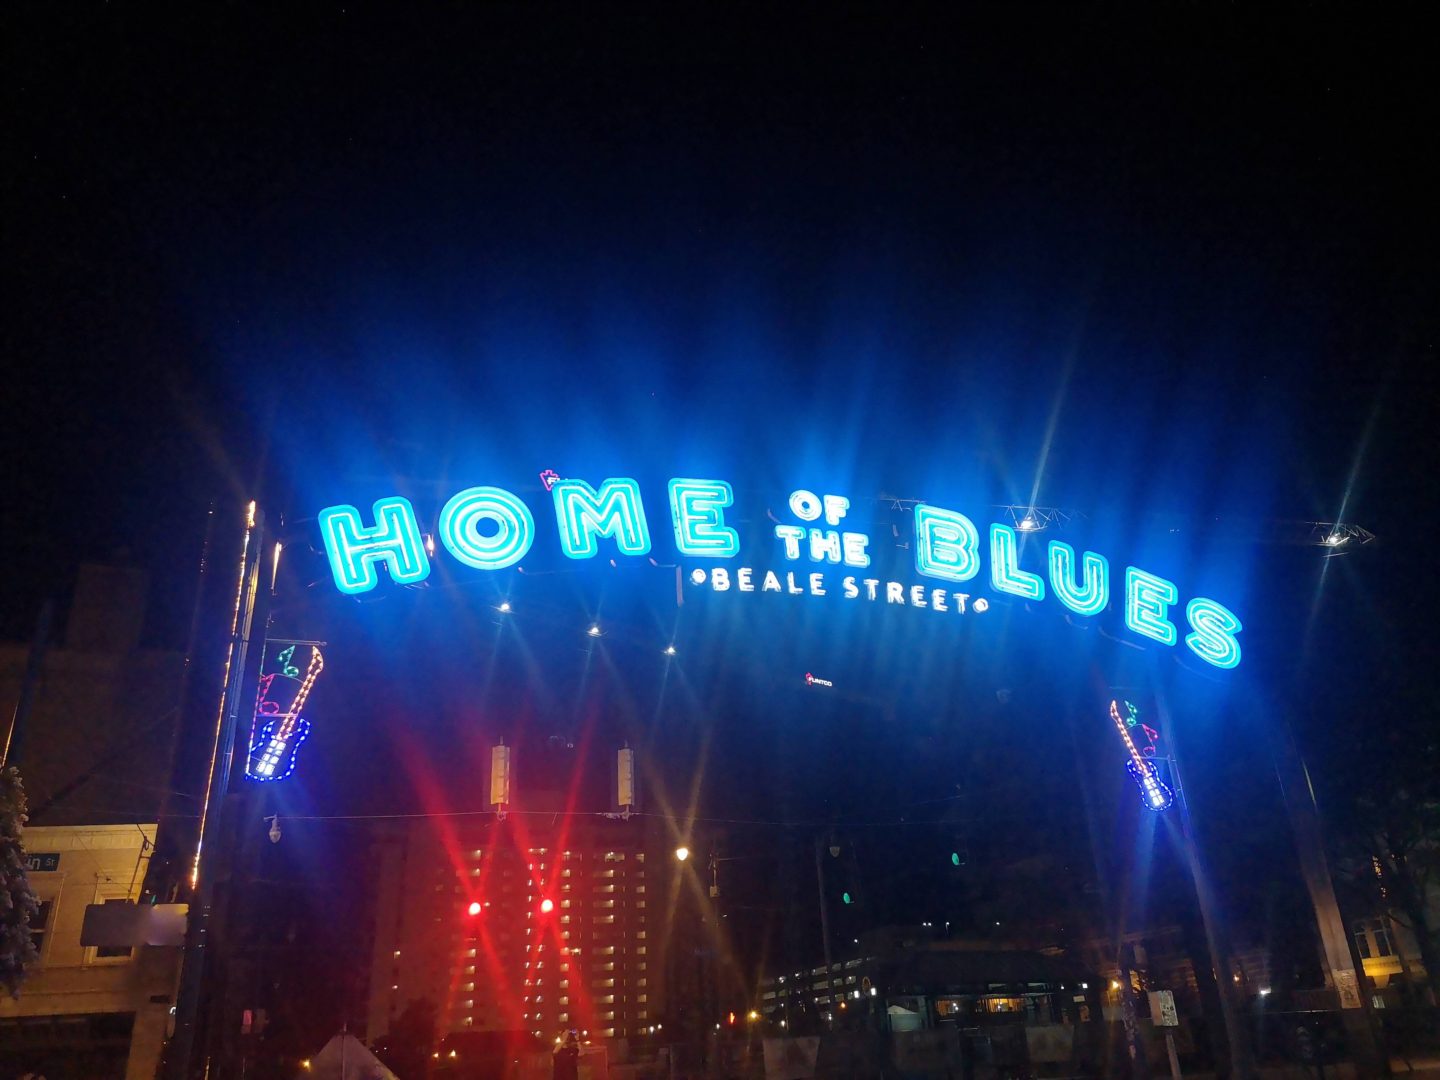 A neon sign on Beale Street naming it the Home of the Blues.